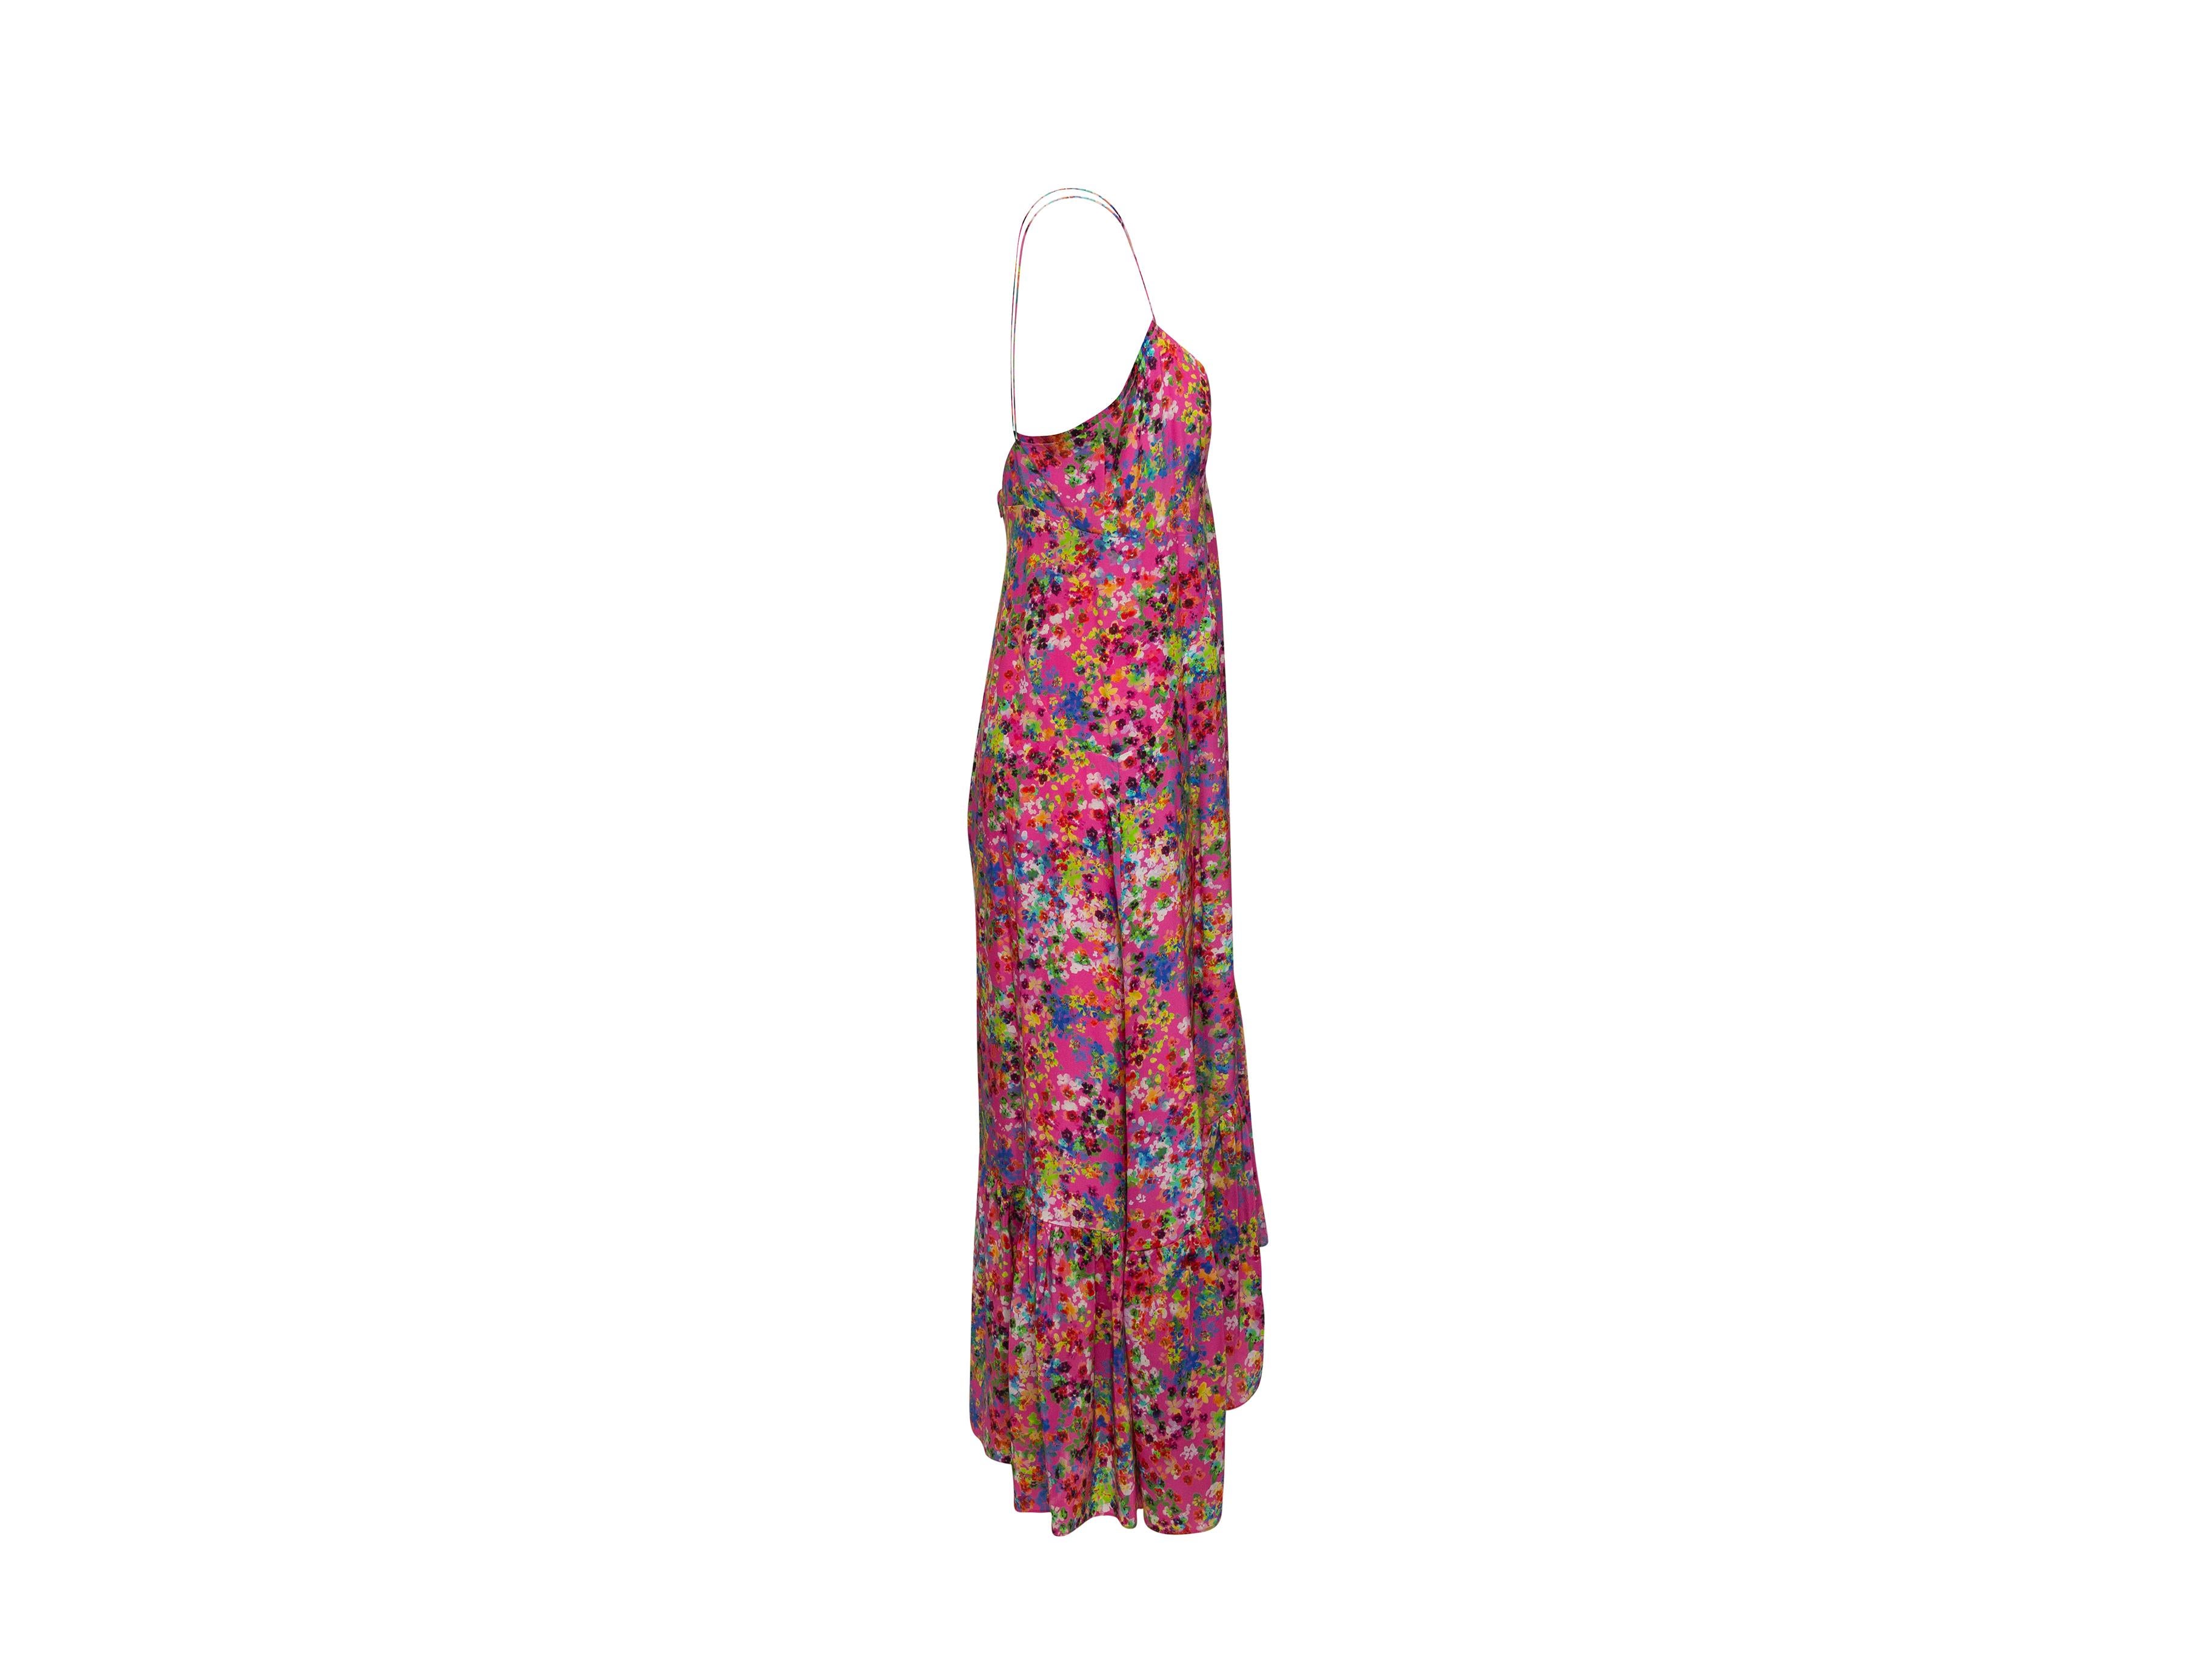 Product details: Fuchsia and multicolor silk sleeveless maxi dress by Saloni. Floral print throughout. V-neck. Narrow straps. Asymmetrical hem. 34